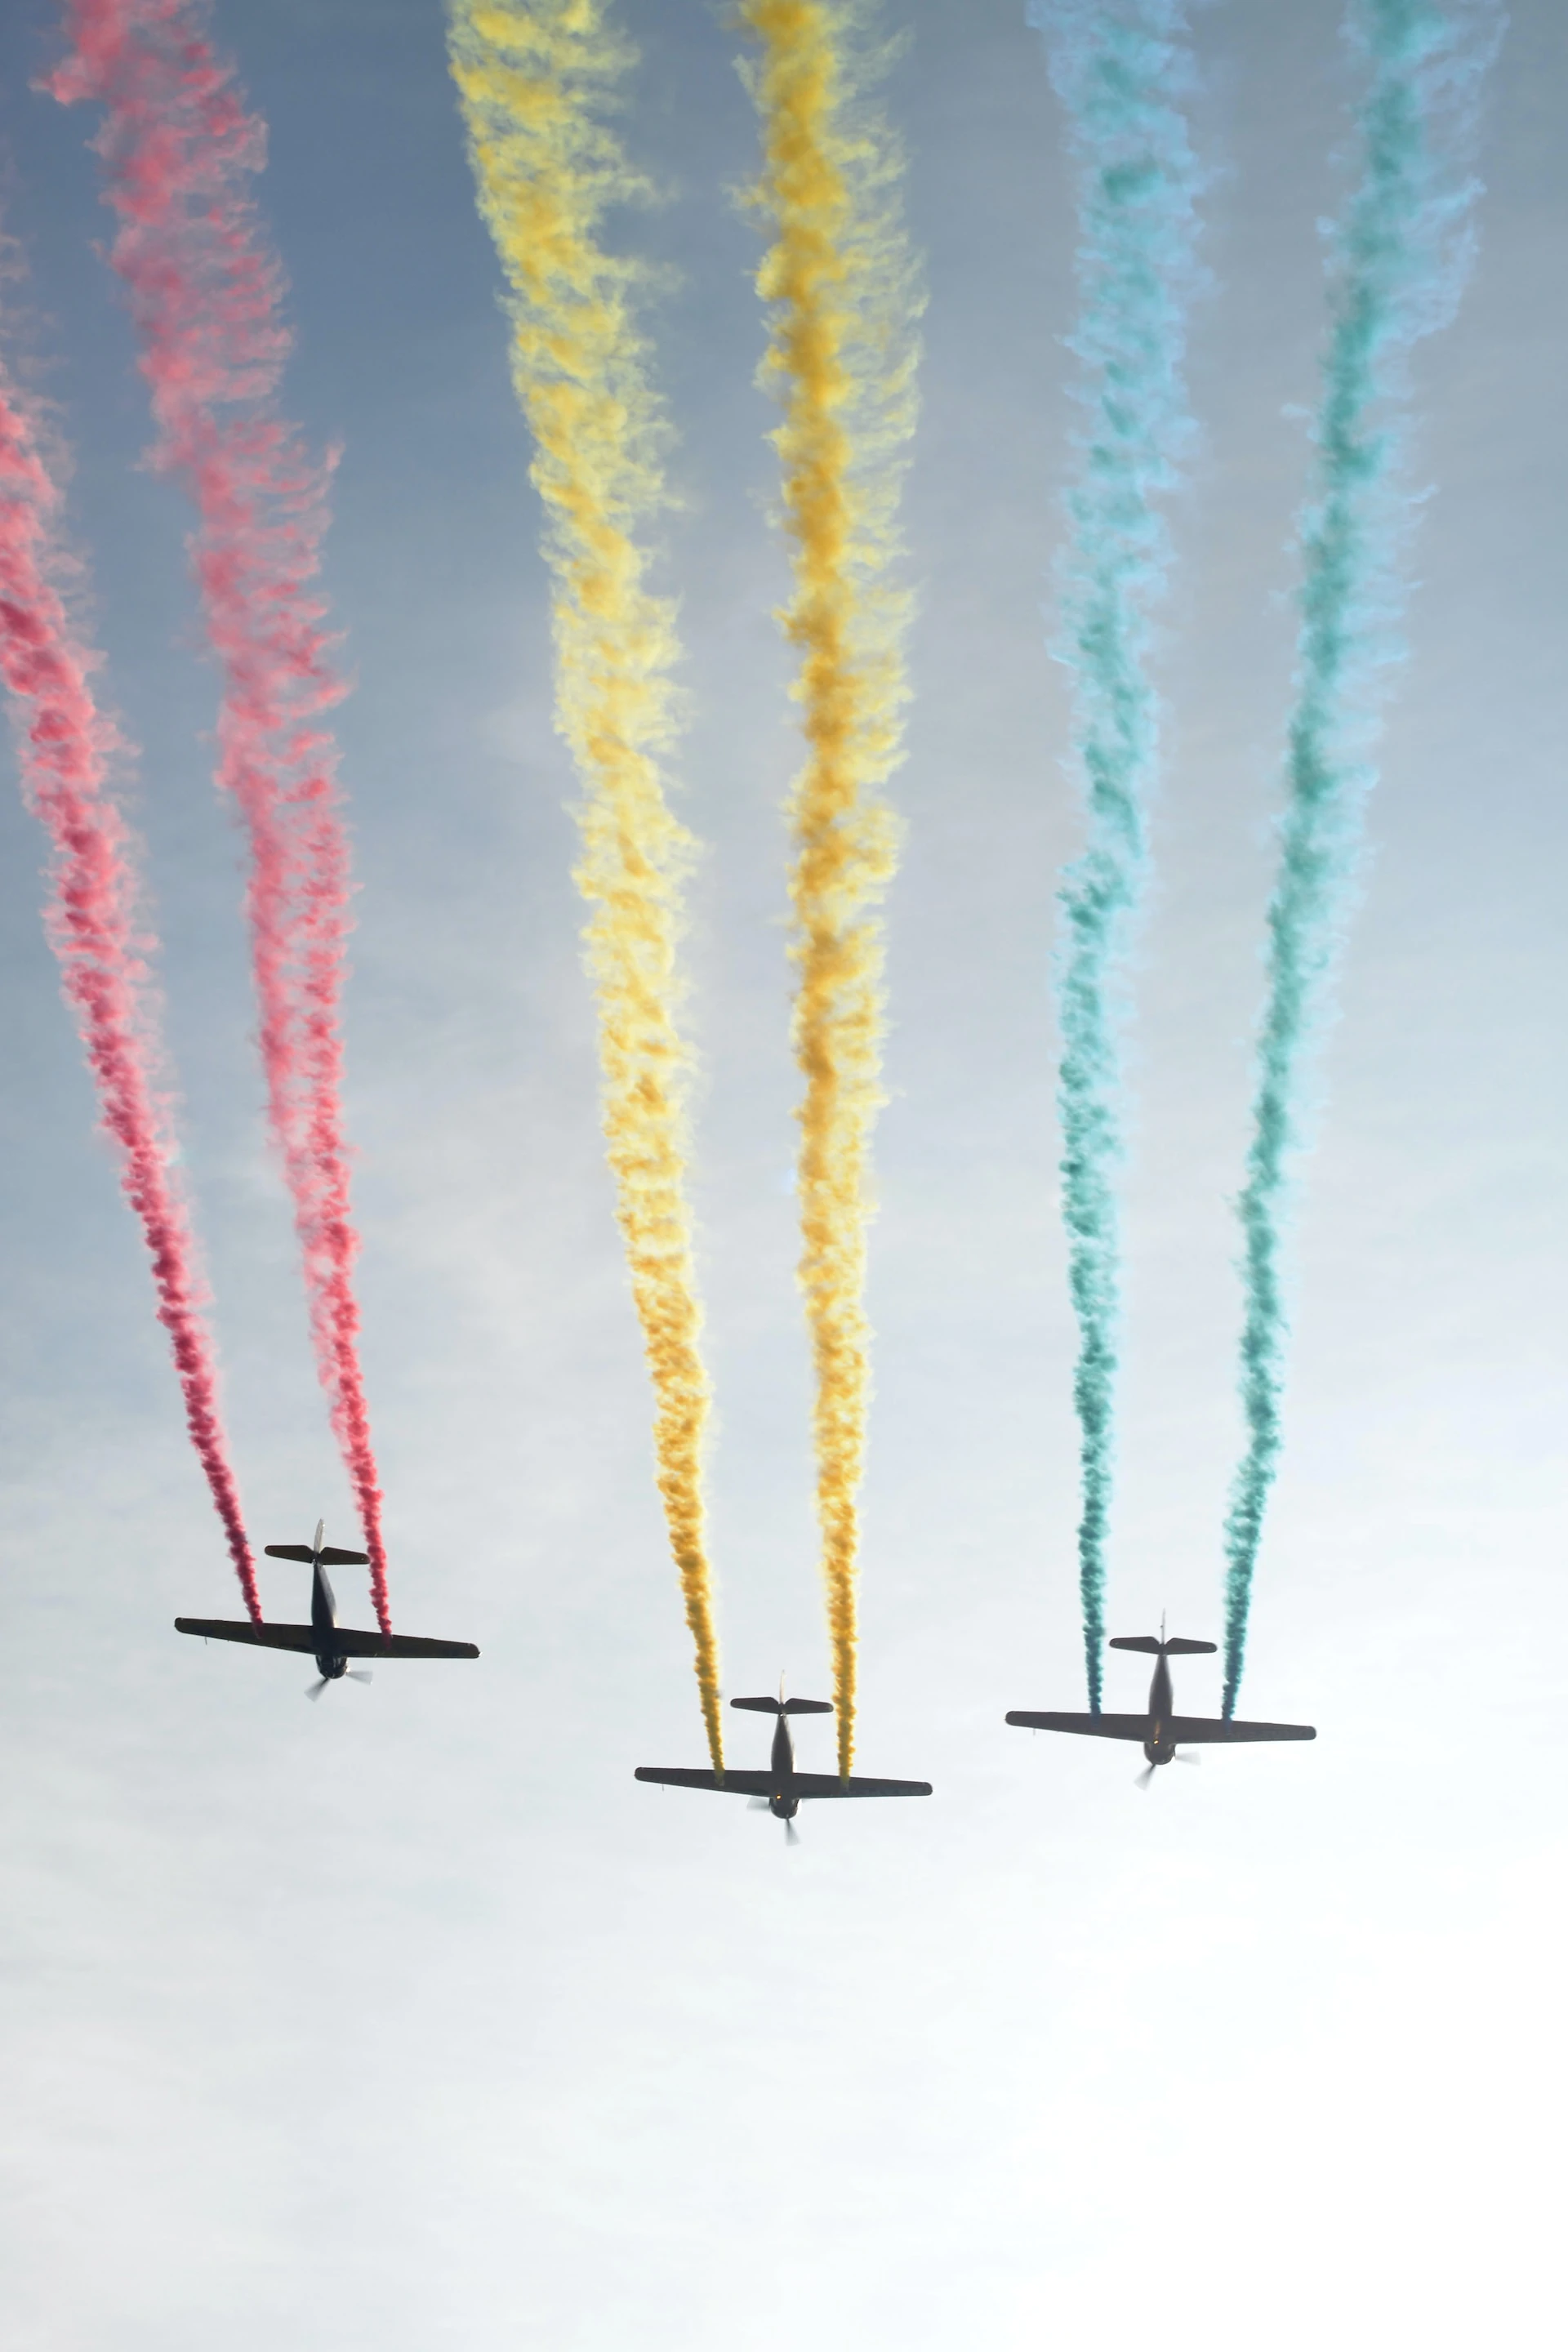 three planes flying through the sky with red, yellow, and blue smoke coming out of each plane respectively